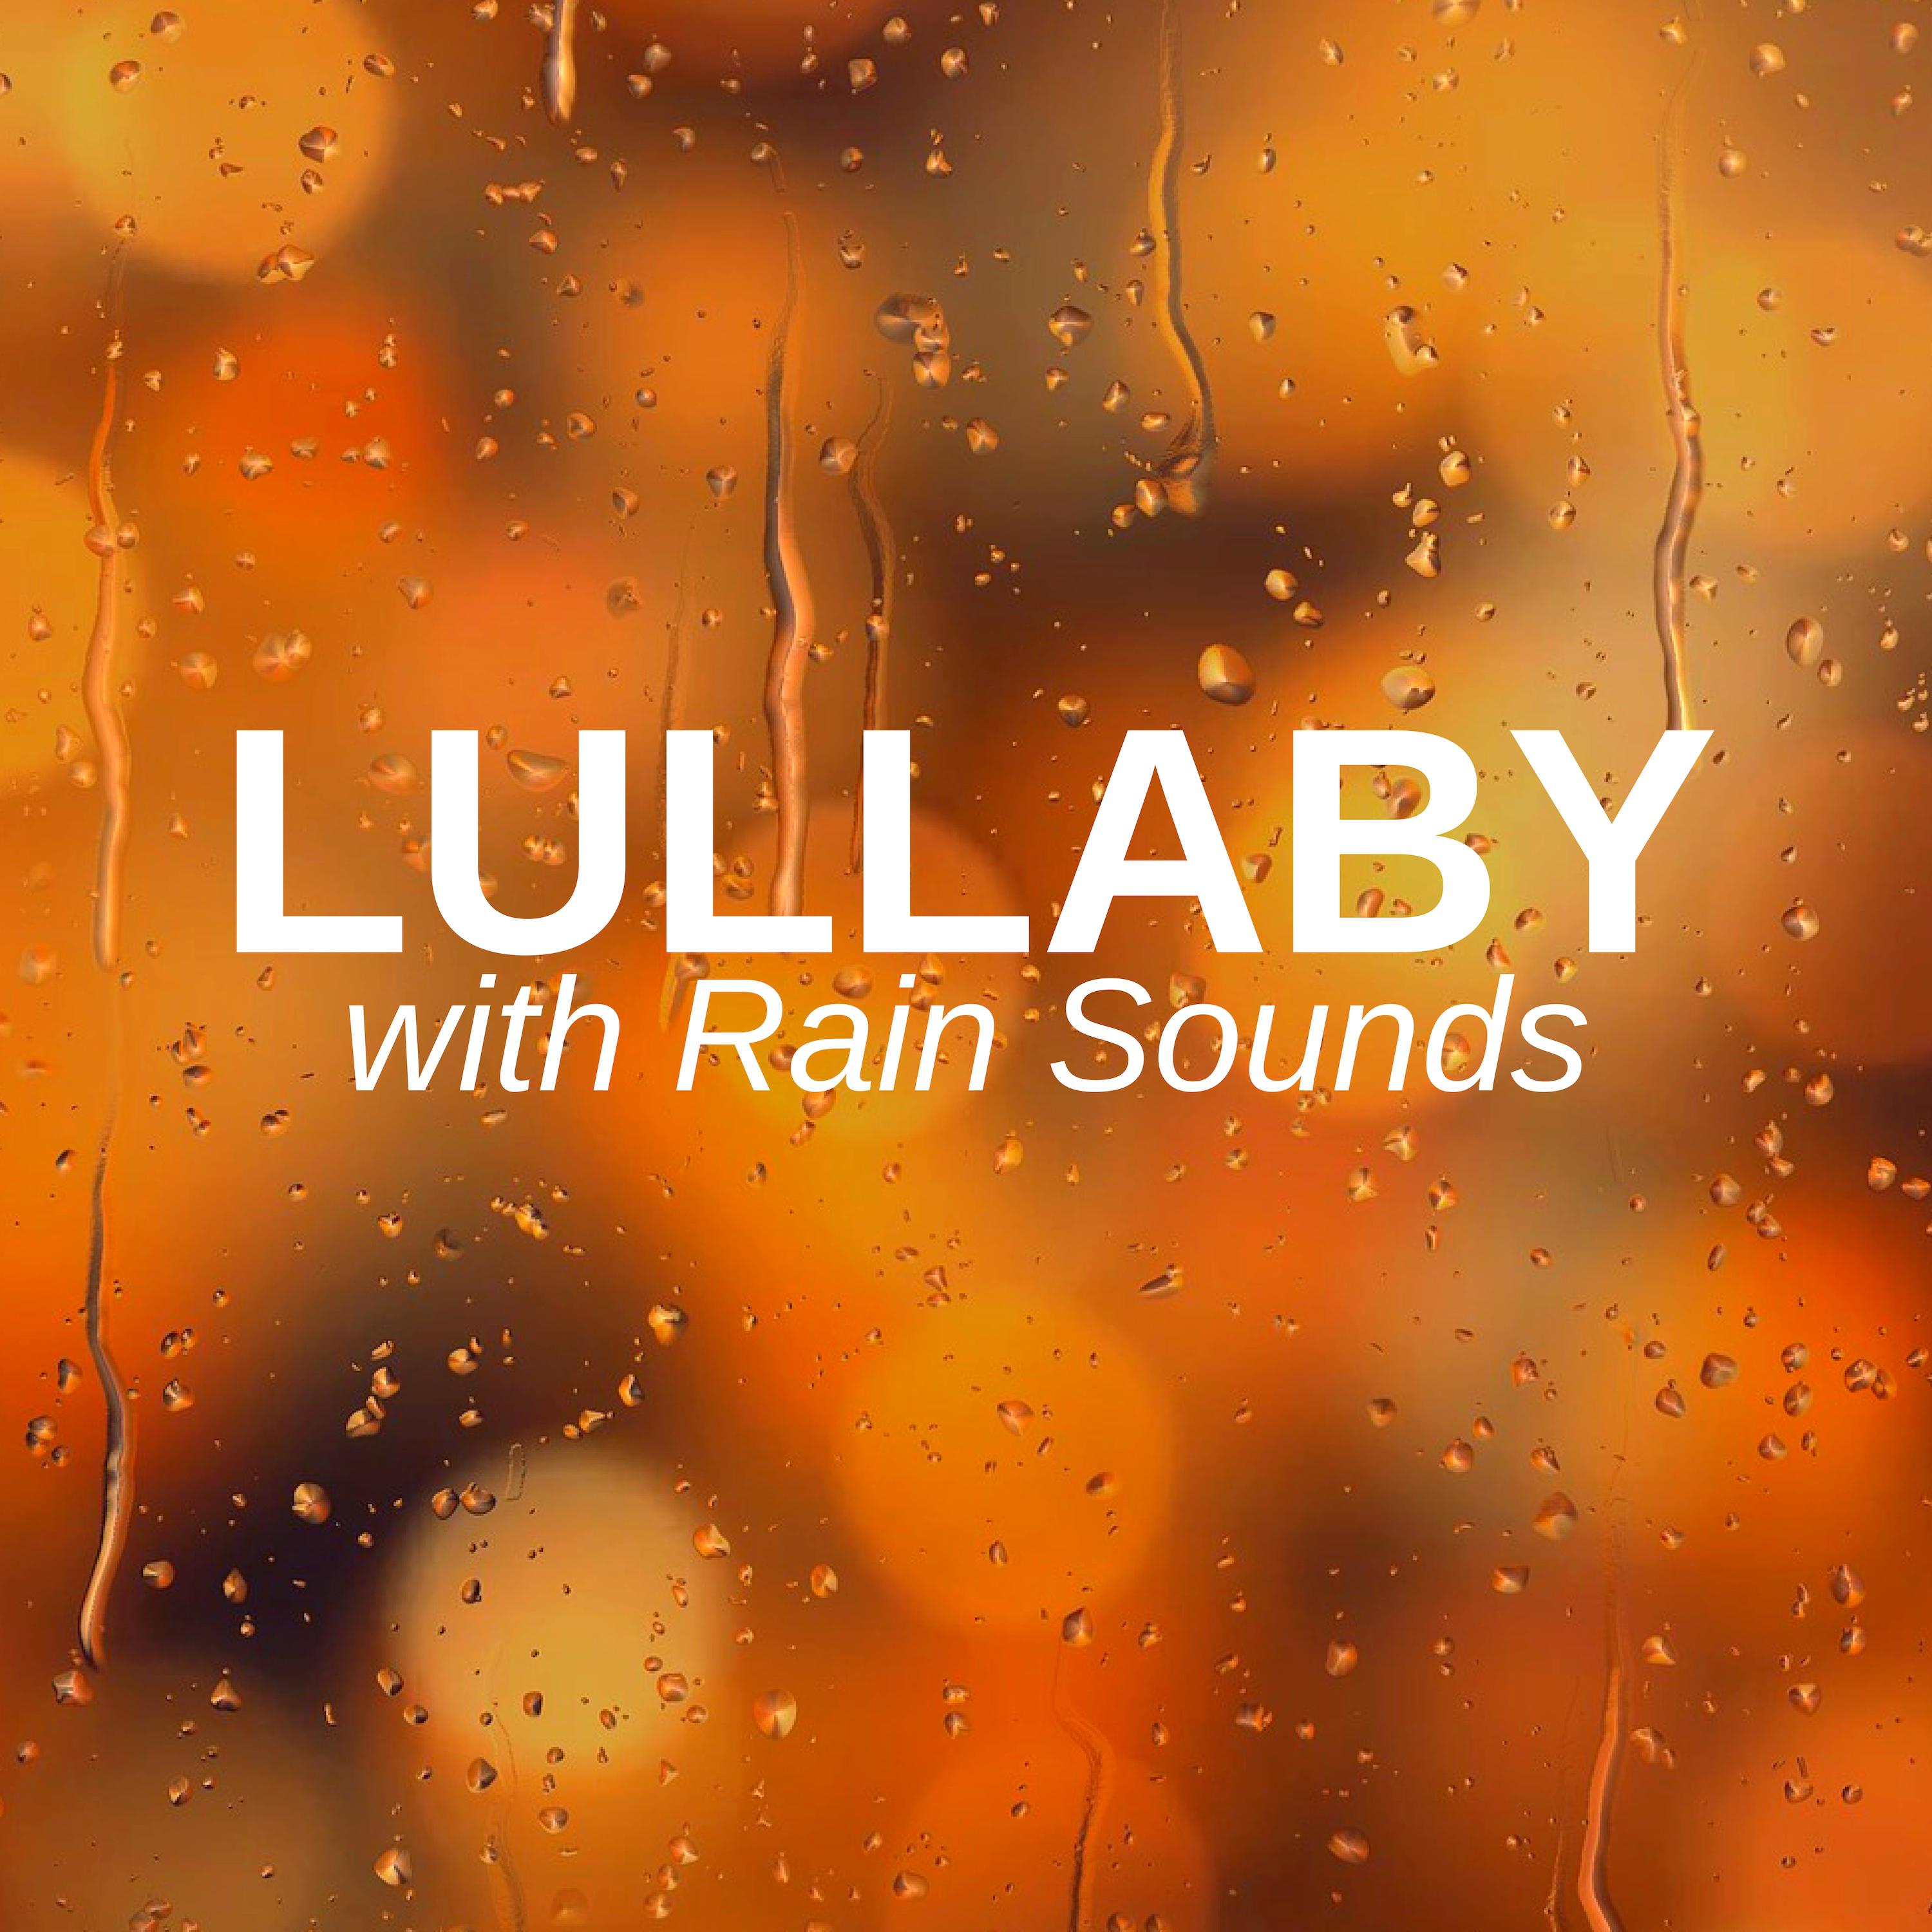 Lullaby with Rain Sounds